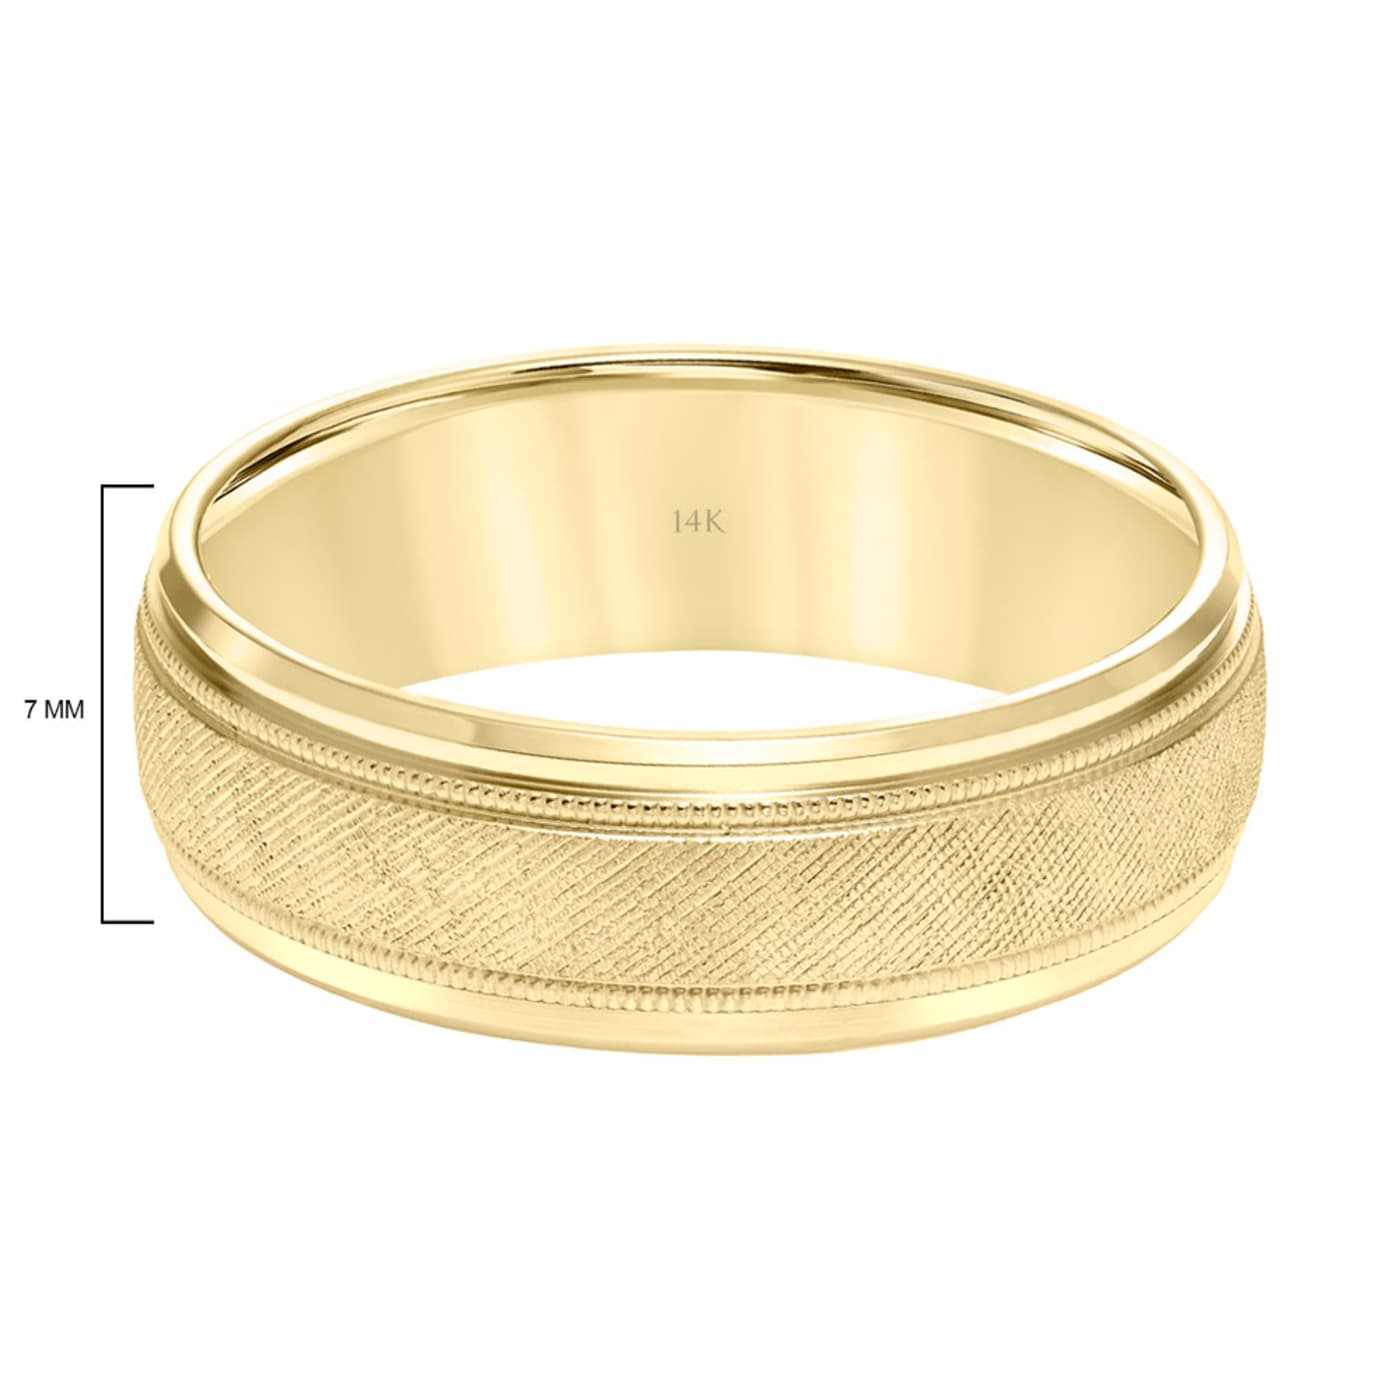 14K Yellow Gold with Milgrain Finish Brilliant Florentine Accents Wedding by Band 7MM - Expressions 1STGPA